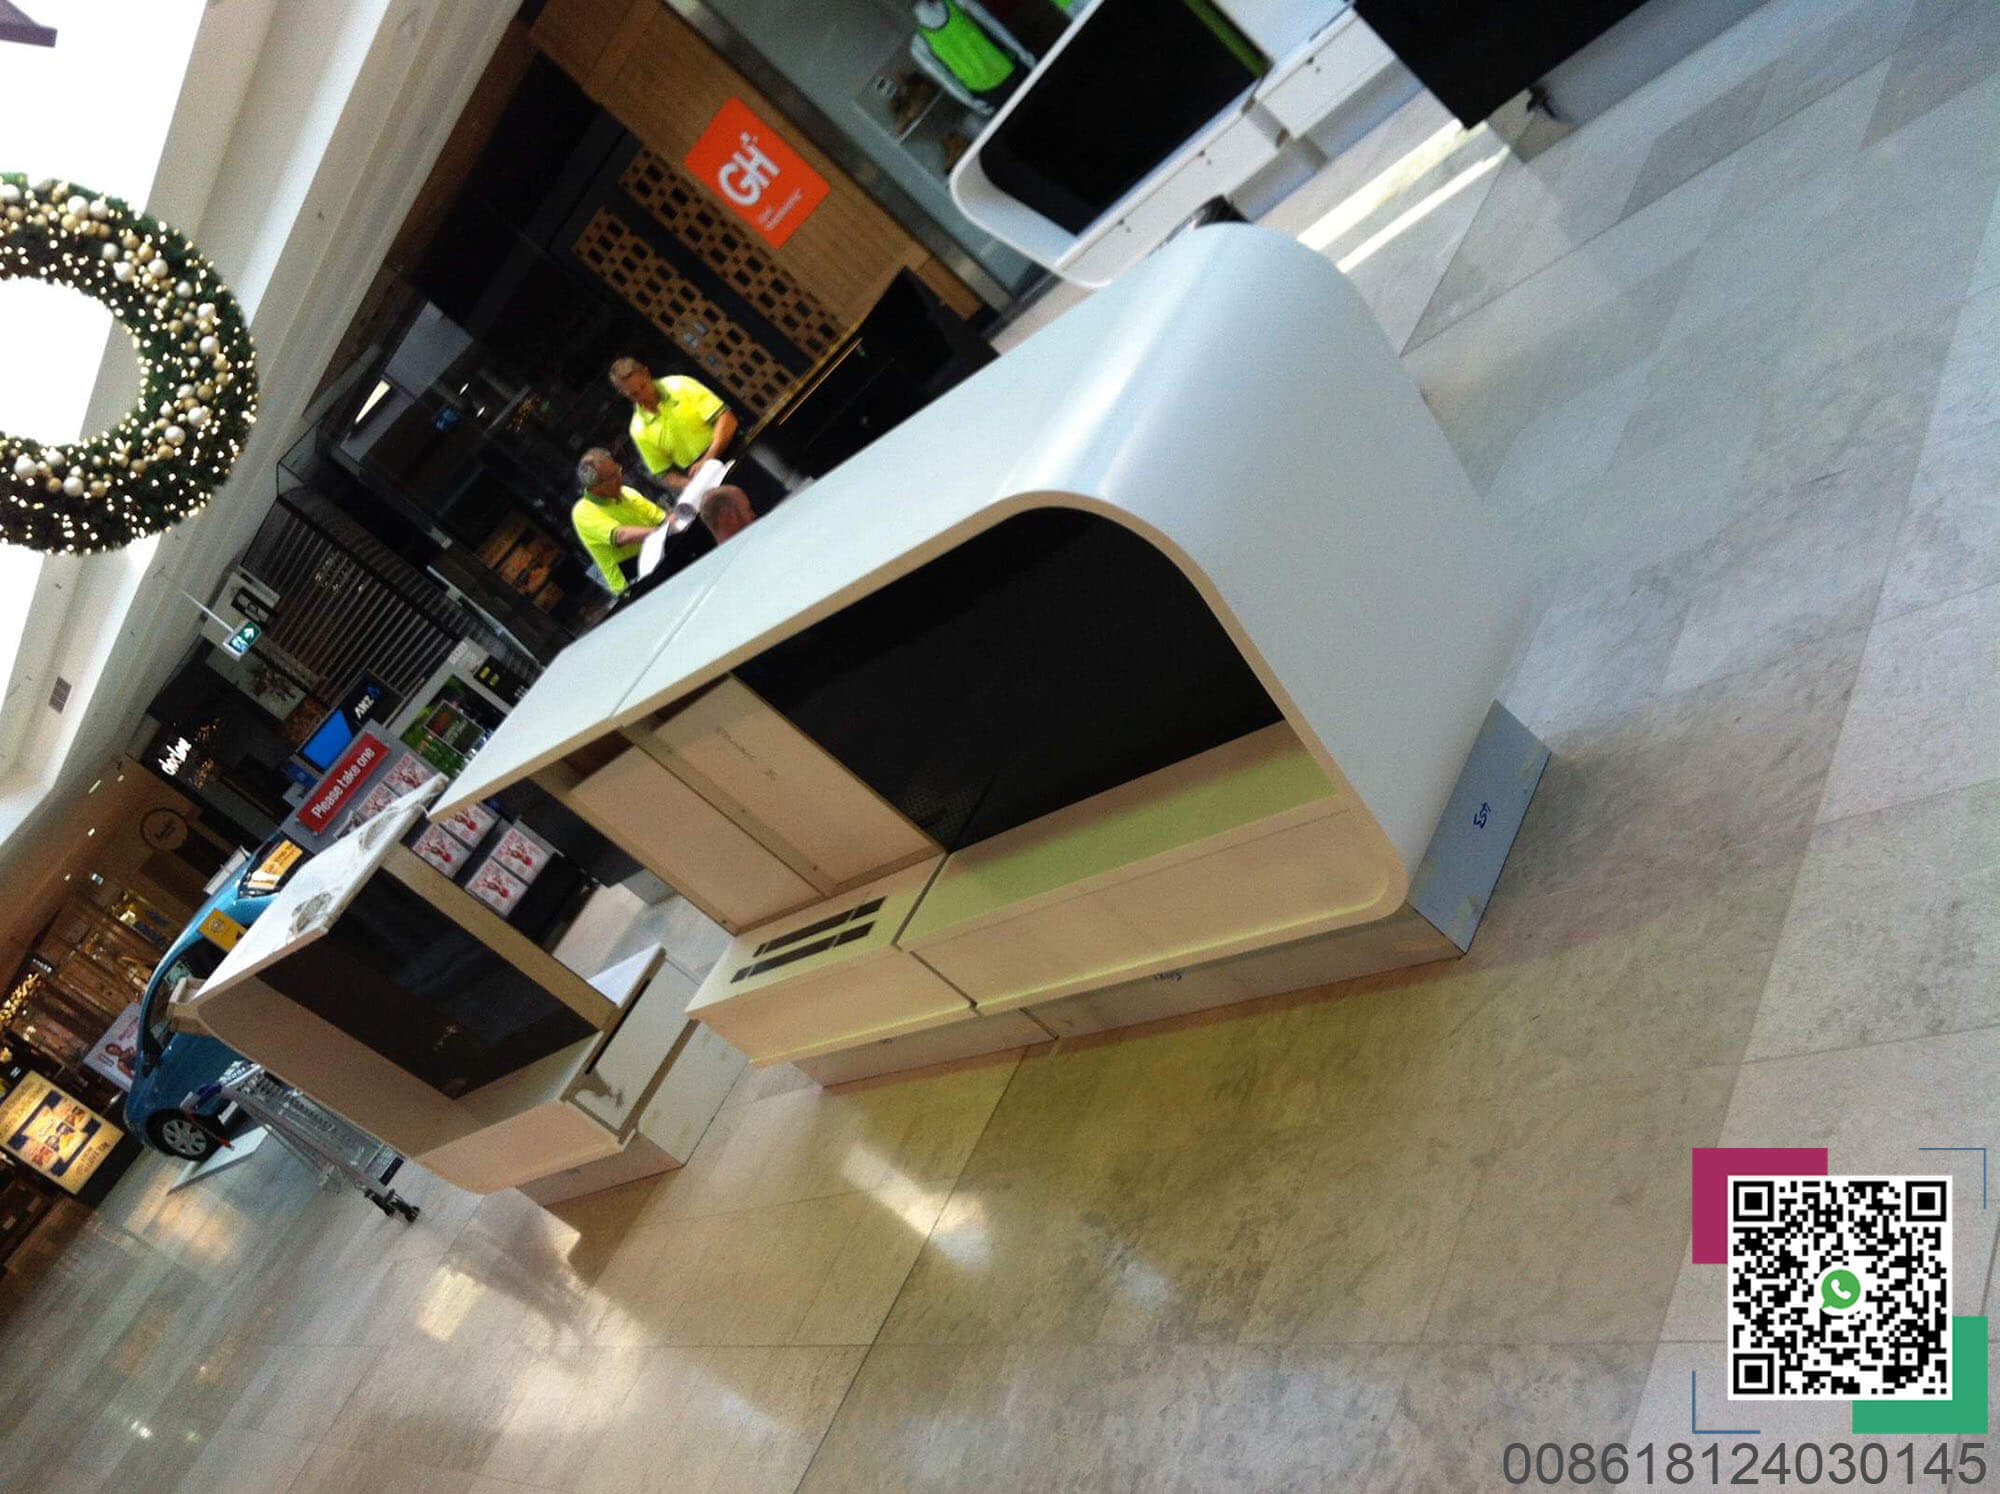 PAK mobile phone kiosks being installed in the mall